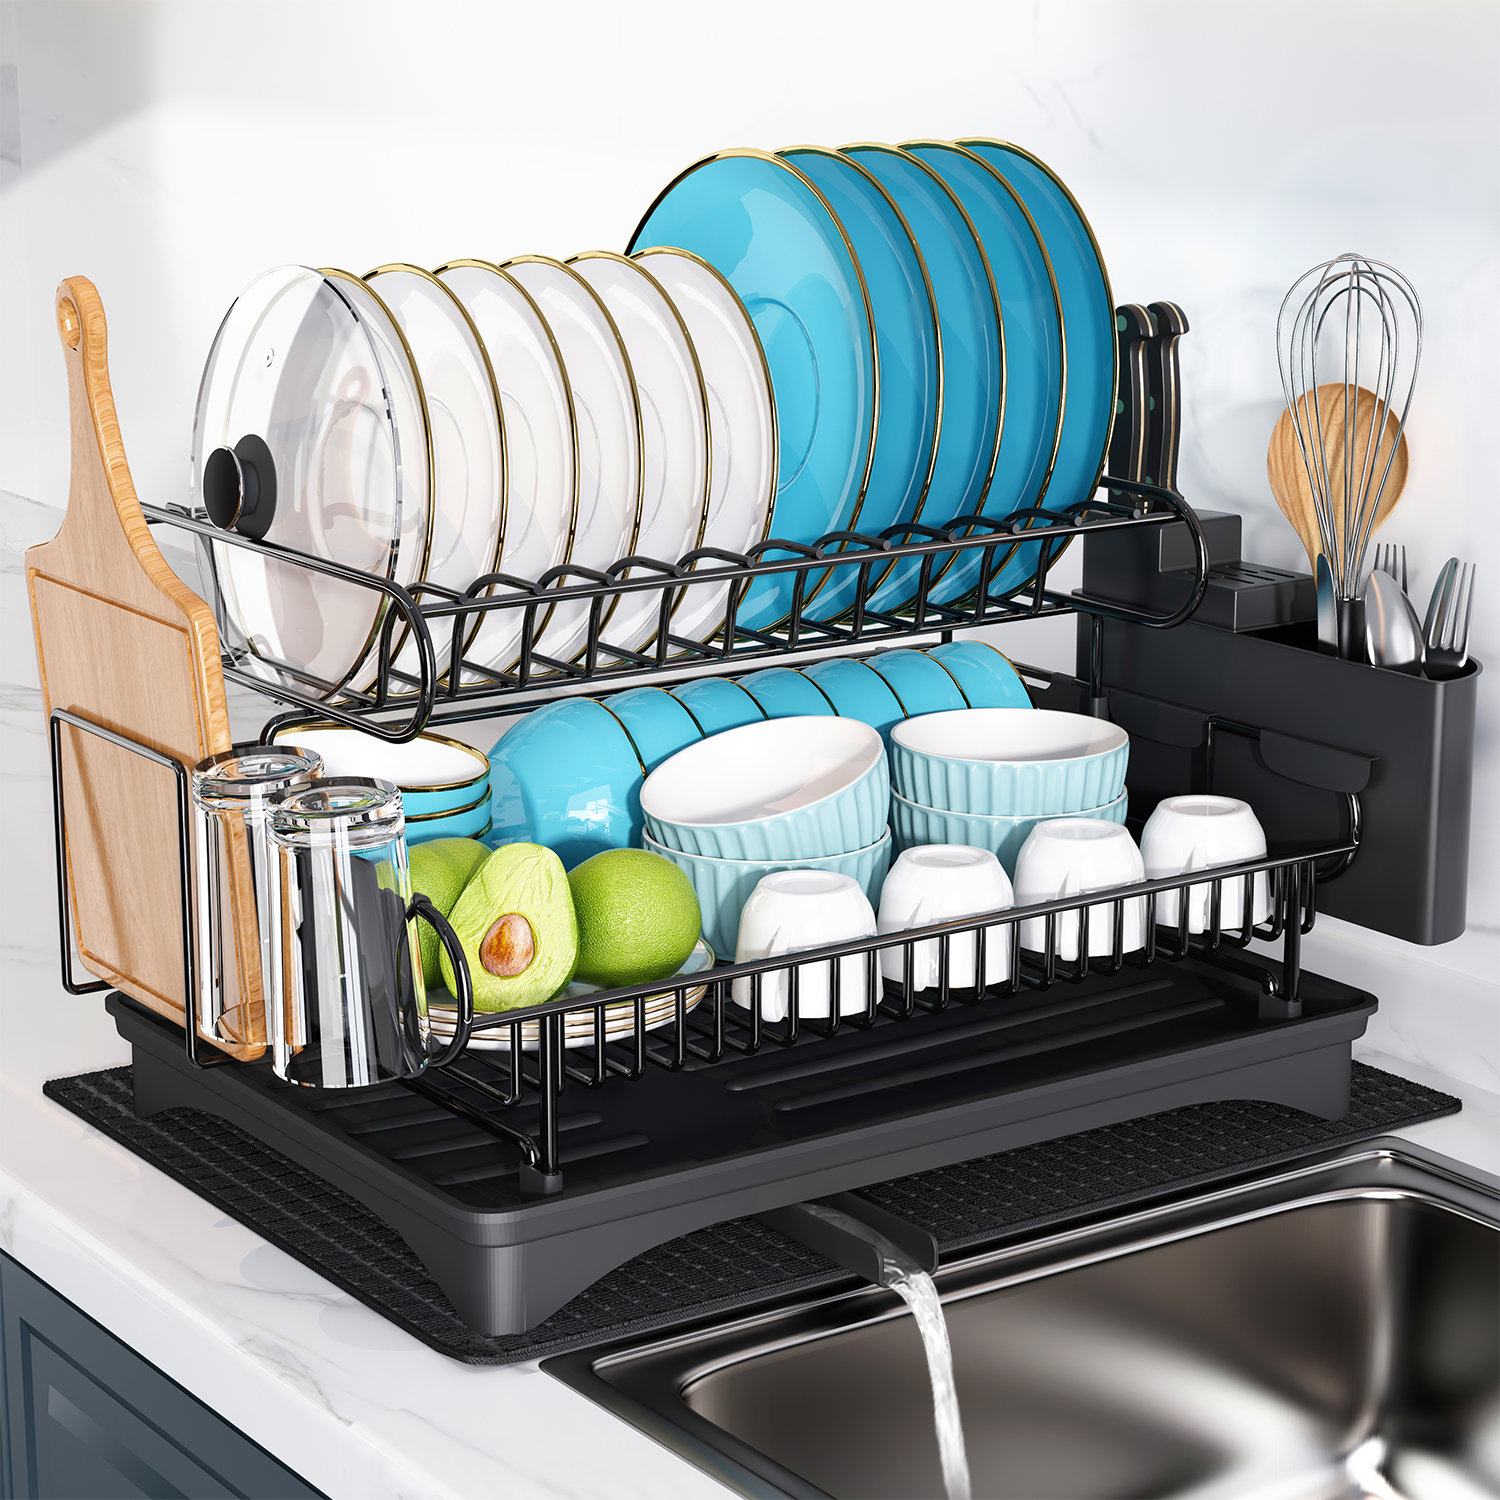 1 Set Dish Rack With Drainboard, 2 Tier Dish Rack For Kitchen